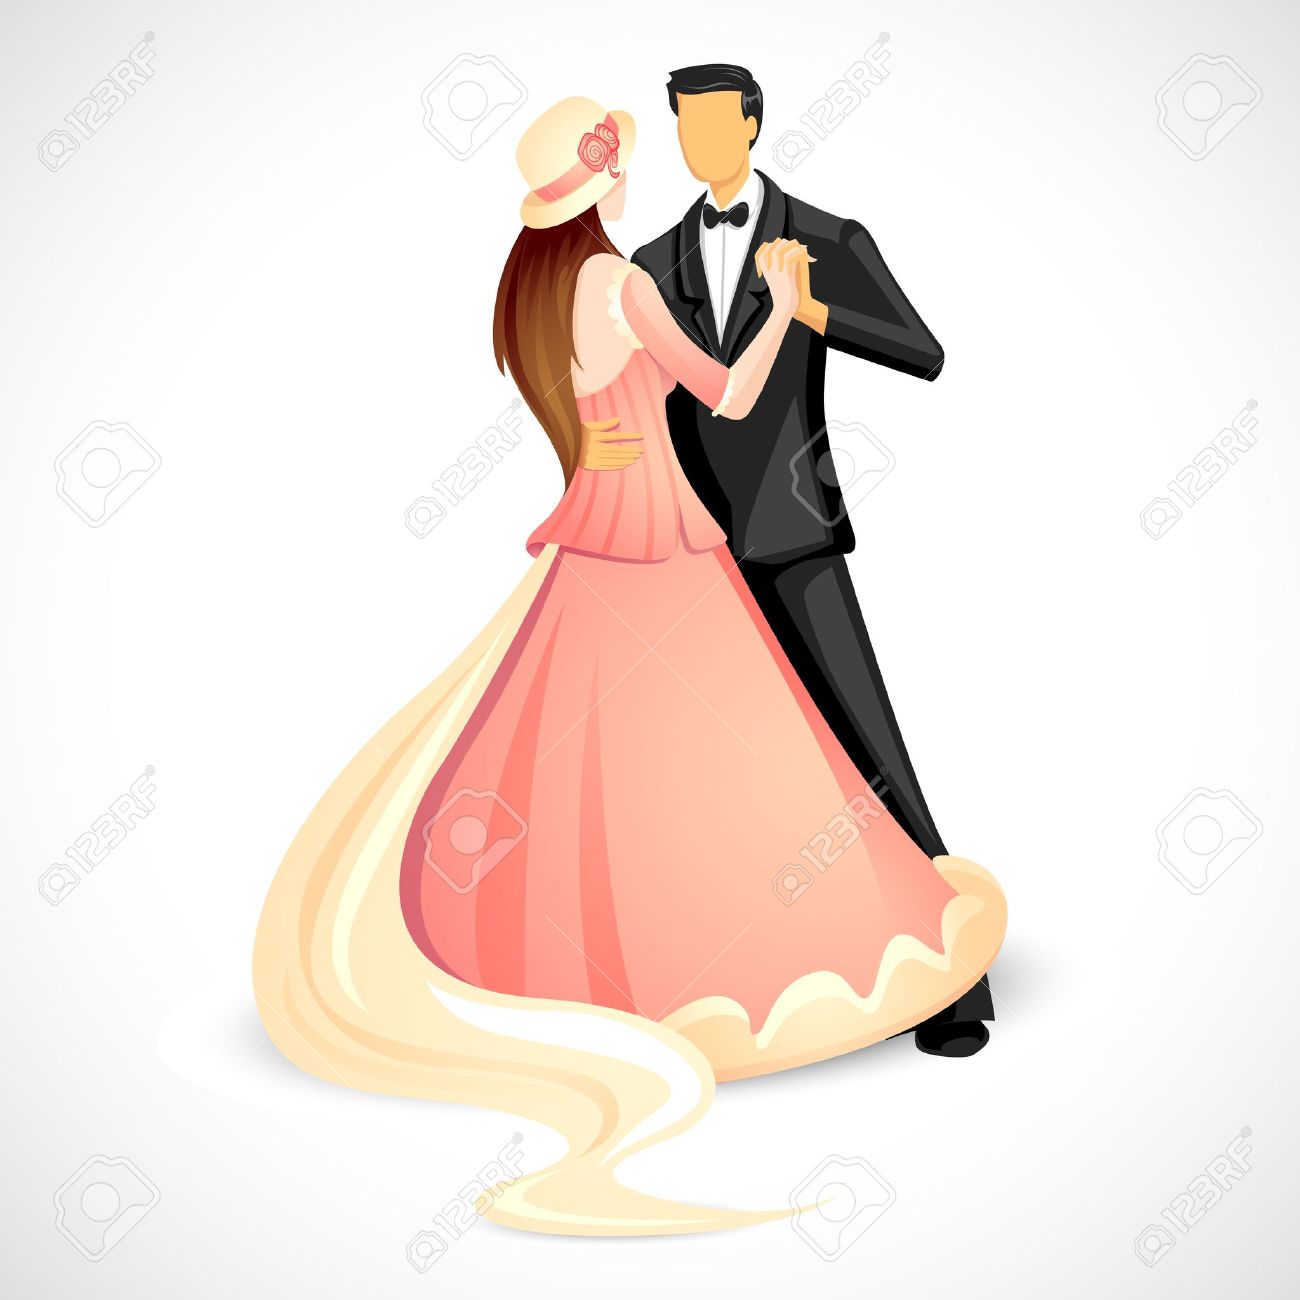 Couple Clipart at GetDrawings.com.